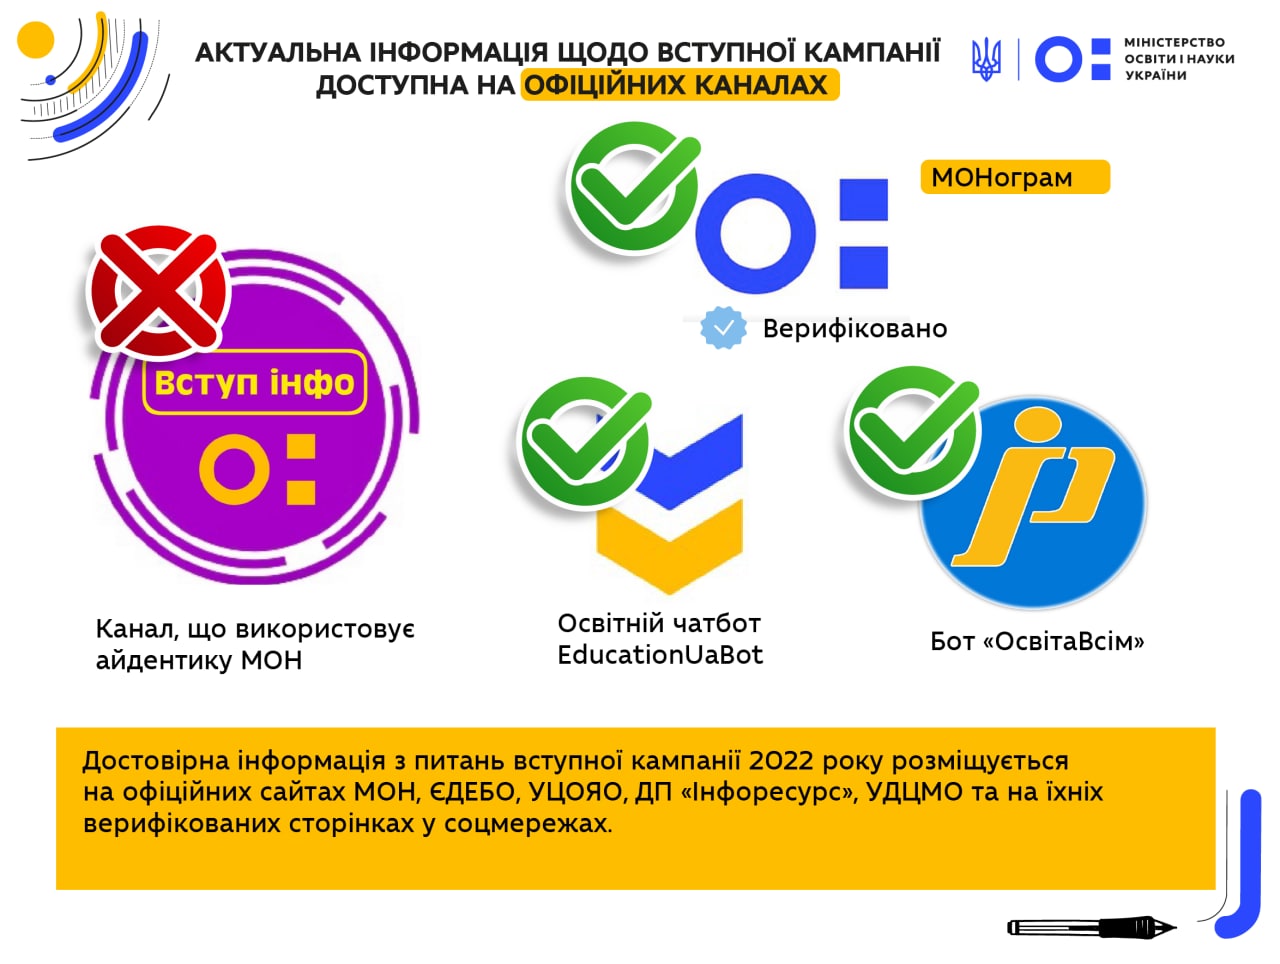 Stopfake: fake news about admission - 2022 with the logo of the Ministry of Education and Science of Ukraine is spreading in social media